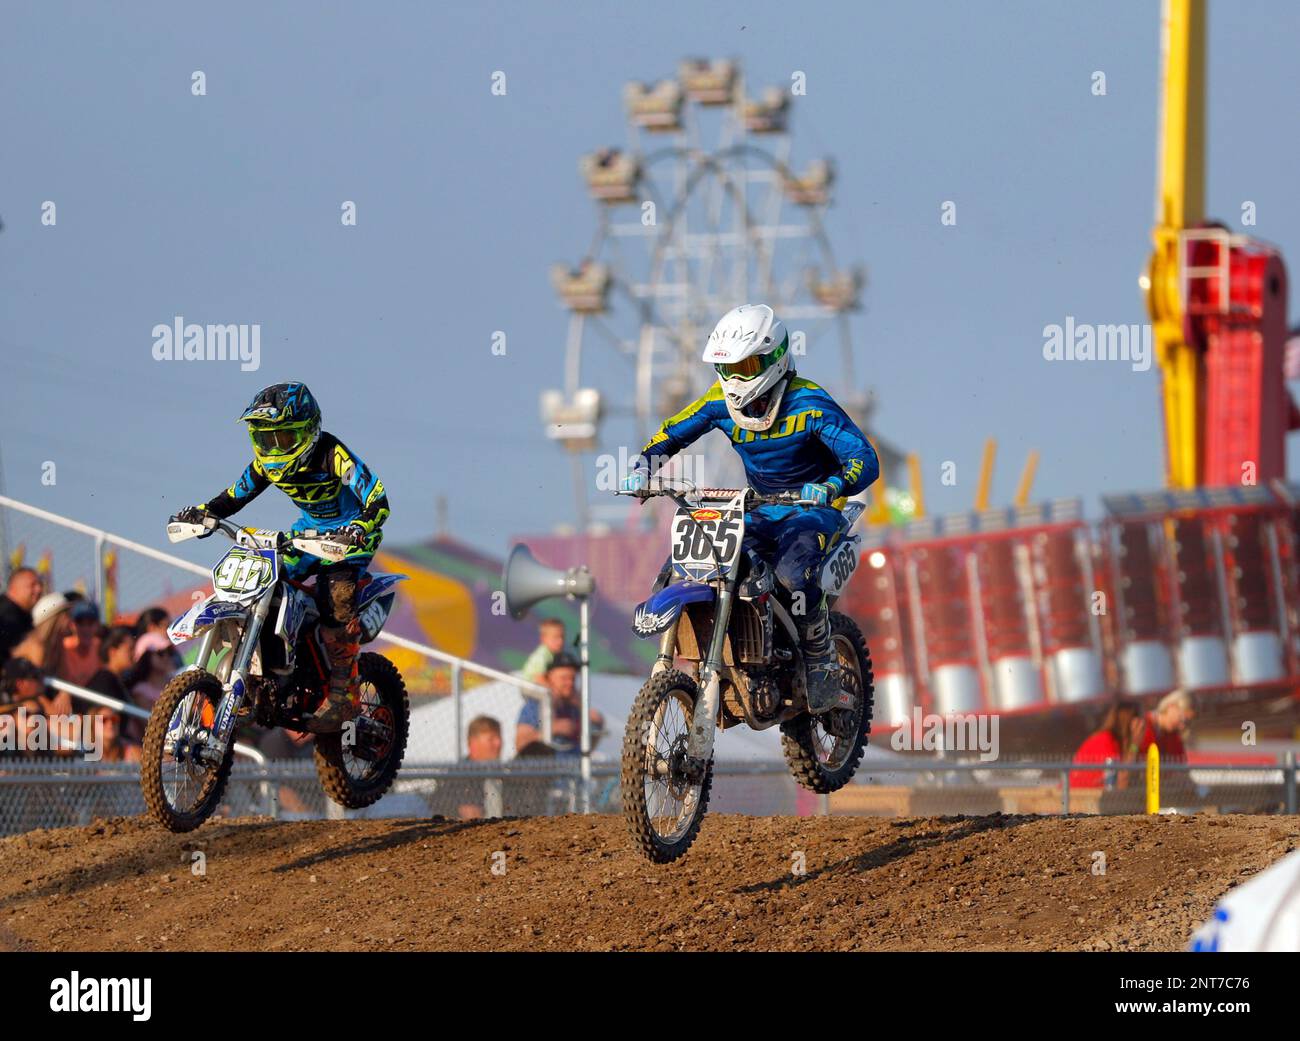 Motocross racers entertain the crowd on opening day of the Lake County Fair Wednesday, July 24, 2019, in Grayslake, Ill